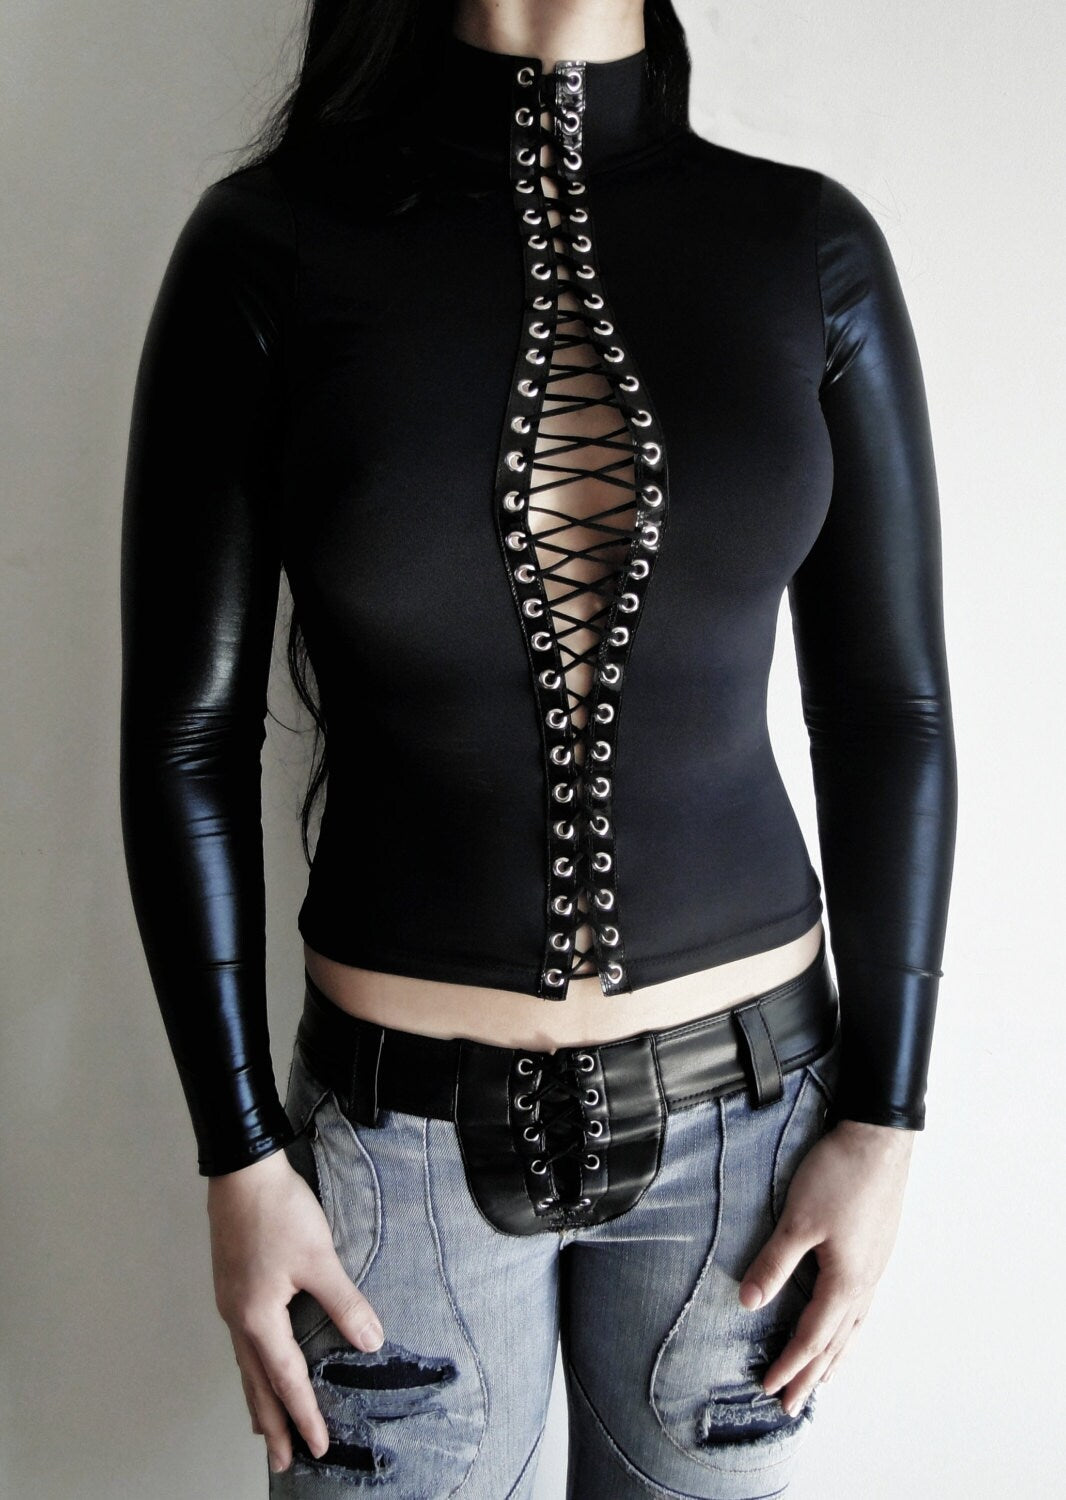 Pvc Sexy Black laced up top,latex Long Sleeve shirt corset style lace up top pvc top latex look